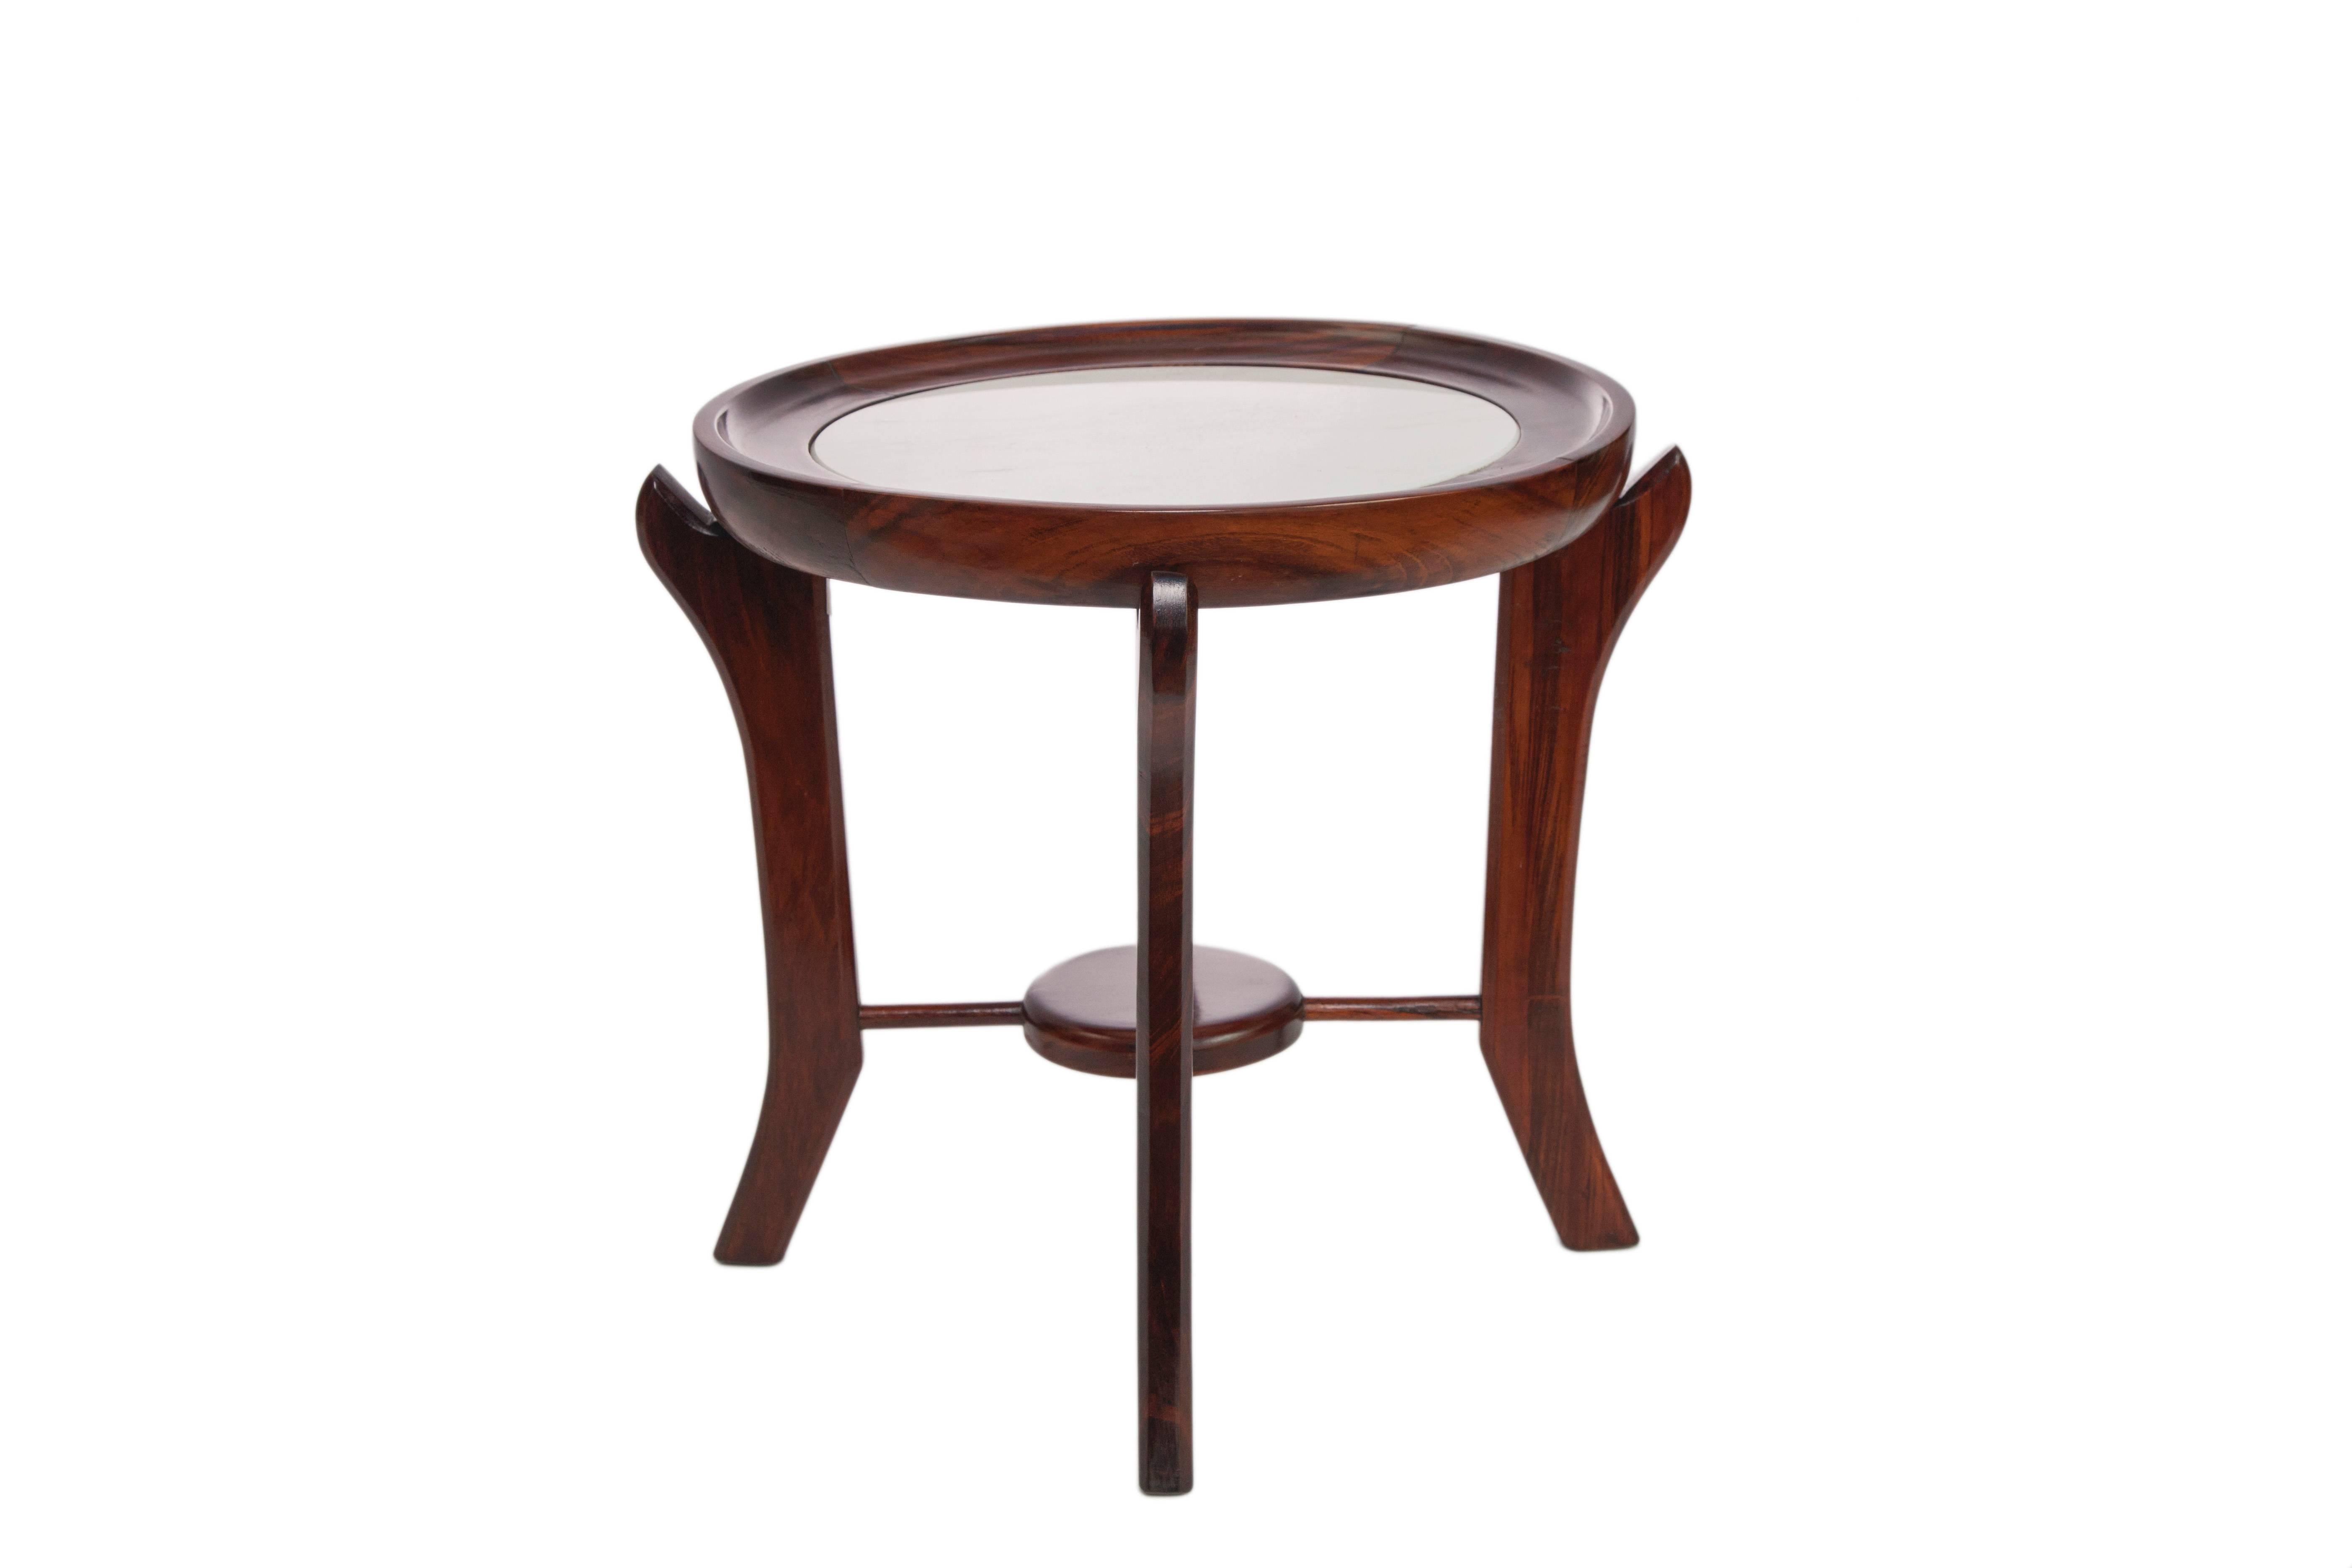 A pair of circa 1960s 'Maracanã' side tables attributed to designer Giuseppe Scapinelli, each in rich Brazilian jacaranda wood, with marble top set against round concave frame, above uniquely formed cabriole legs, with spreaders joined by a central